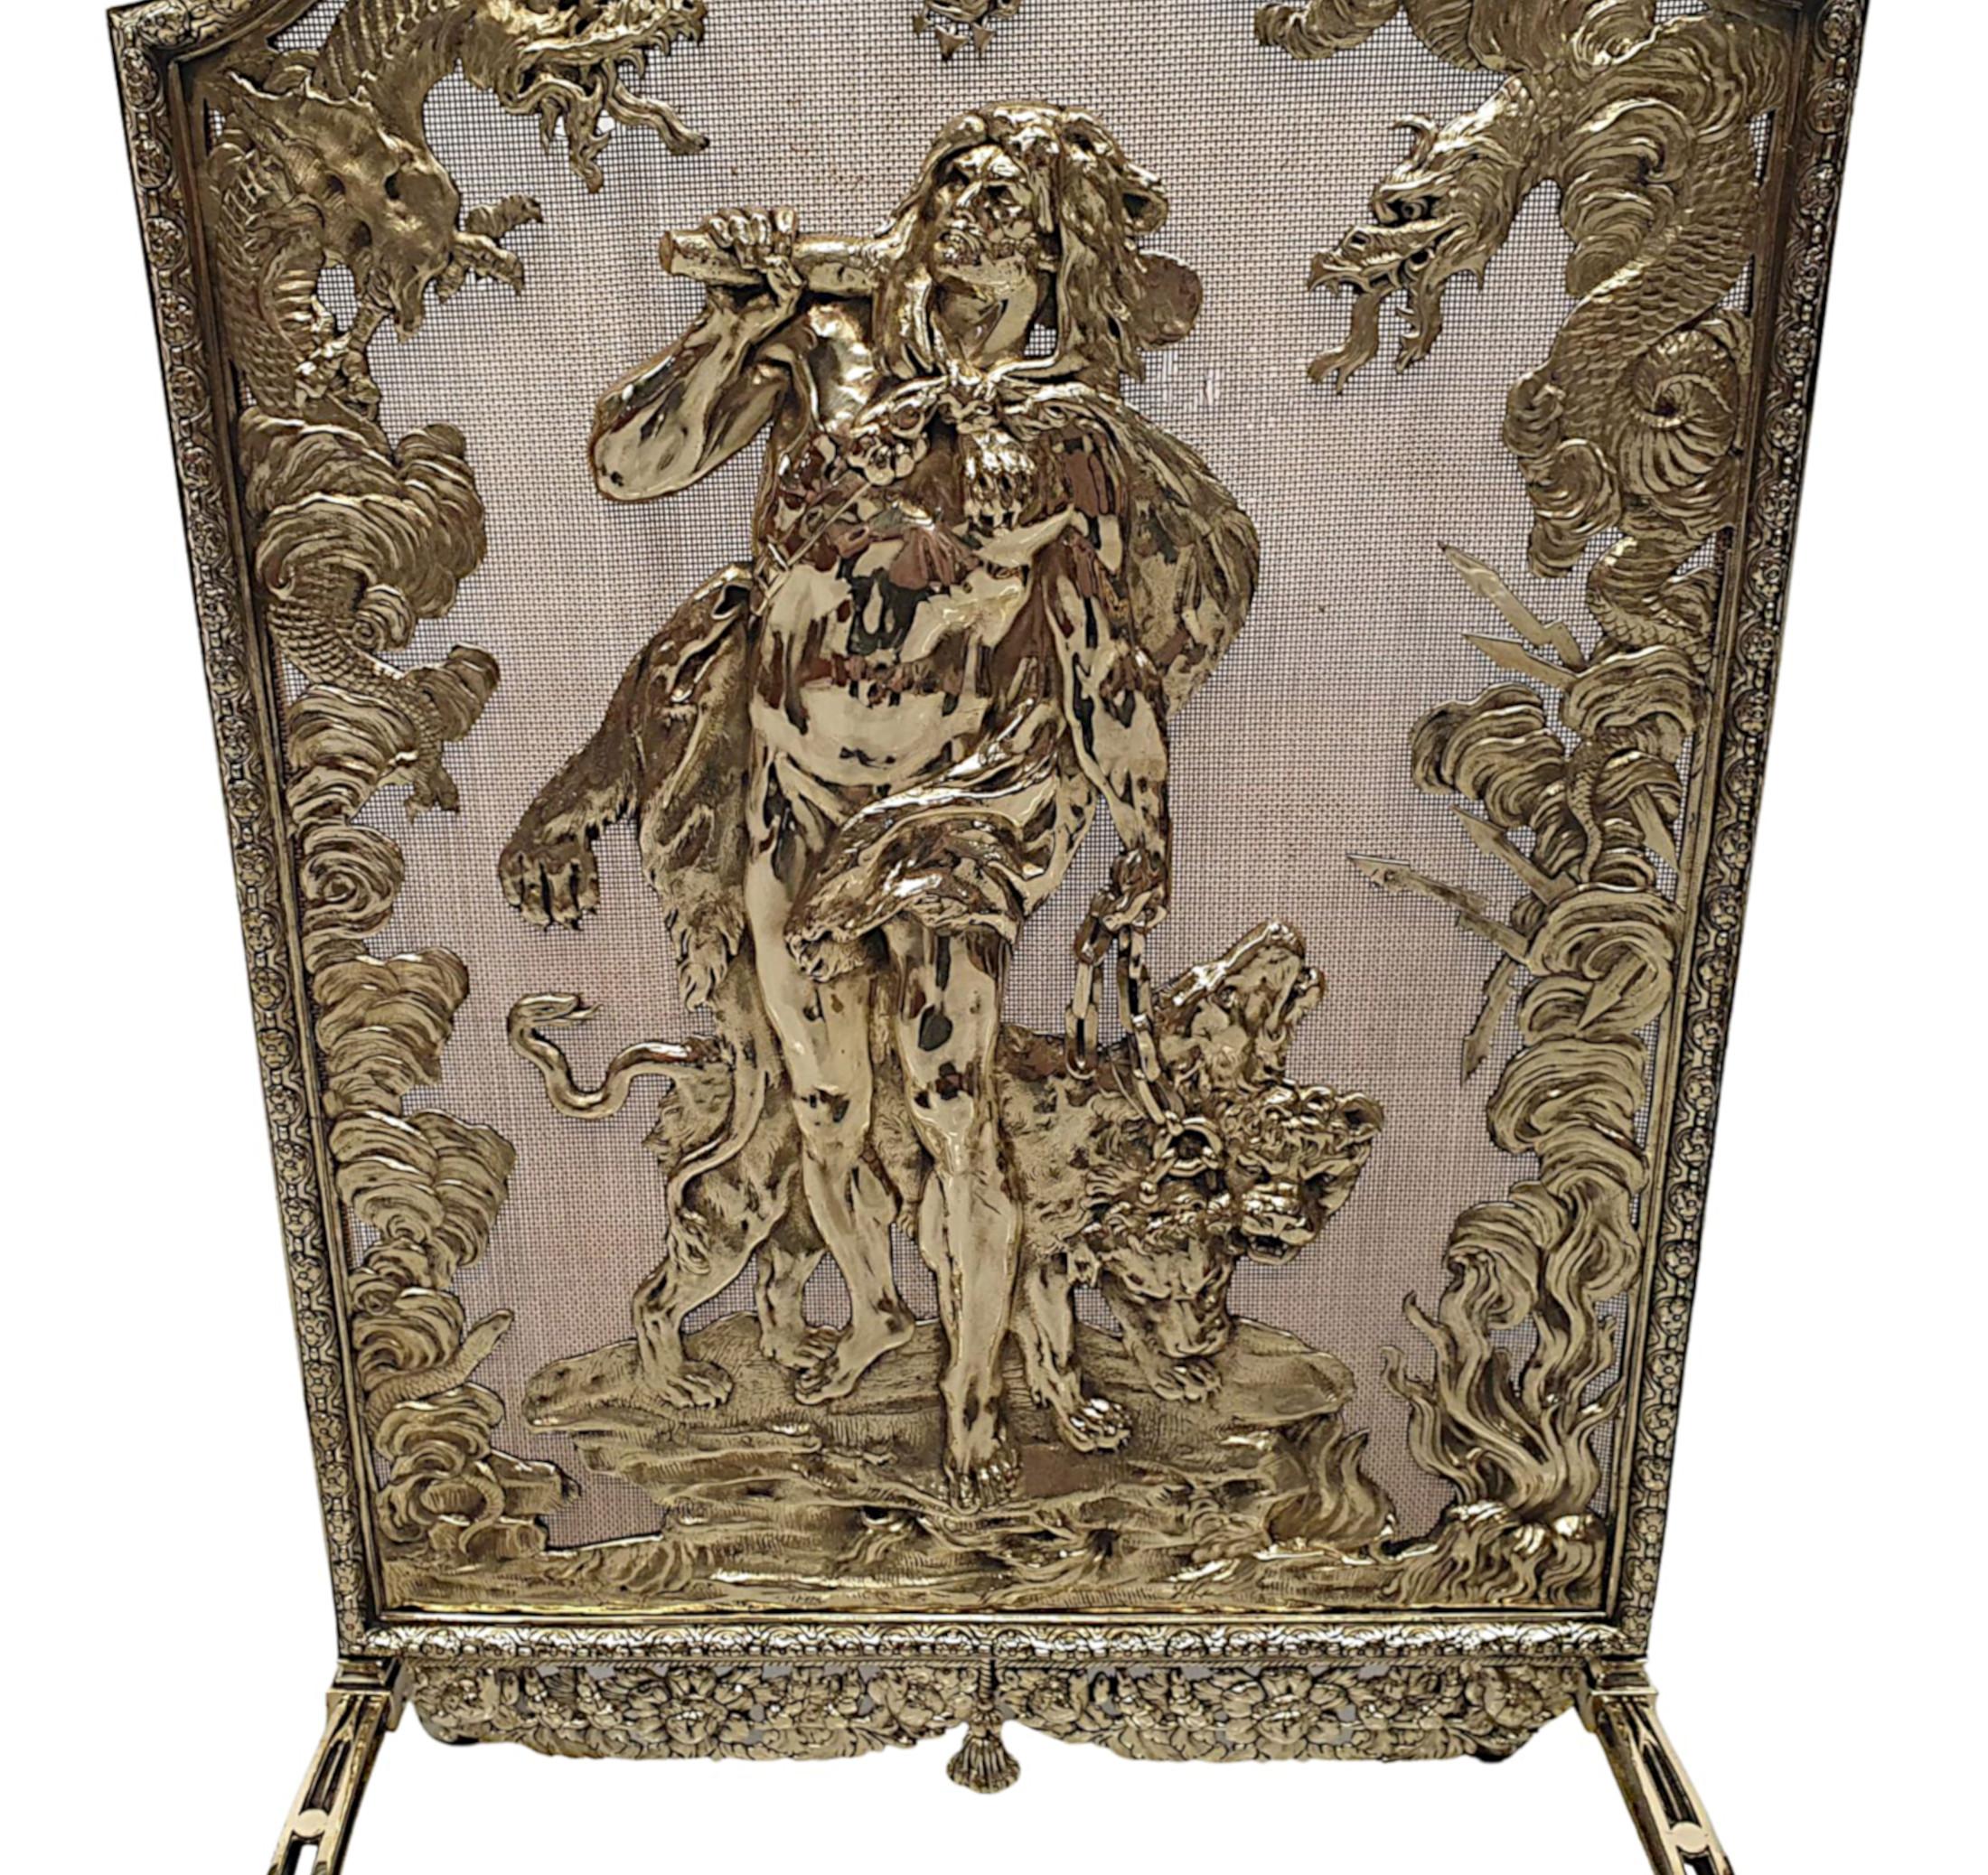 A very rare and fine 19th Century brass fire screen, of exceptional quality, fully restored and of grand proportions. The protective wire mesh of shaped, rectangular form is set within a fabulously detailed polished, cast brass frame with beautiful